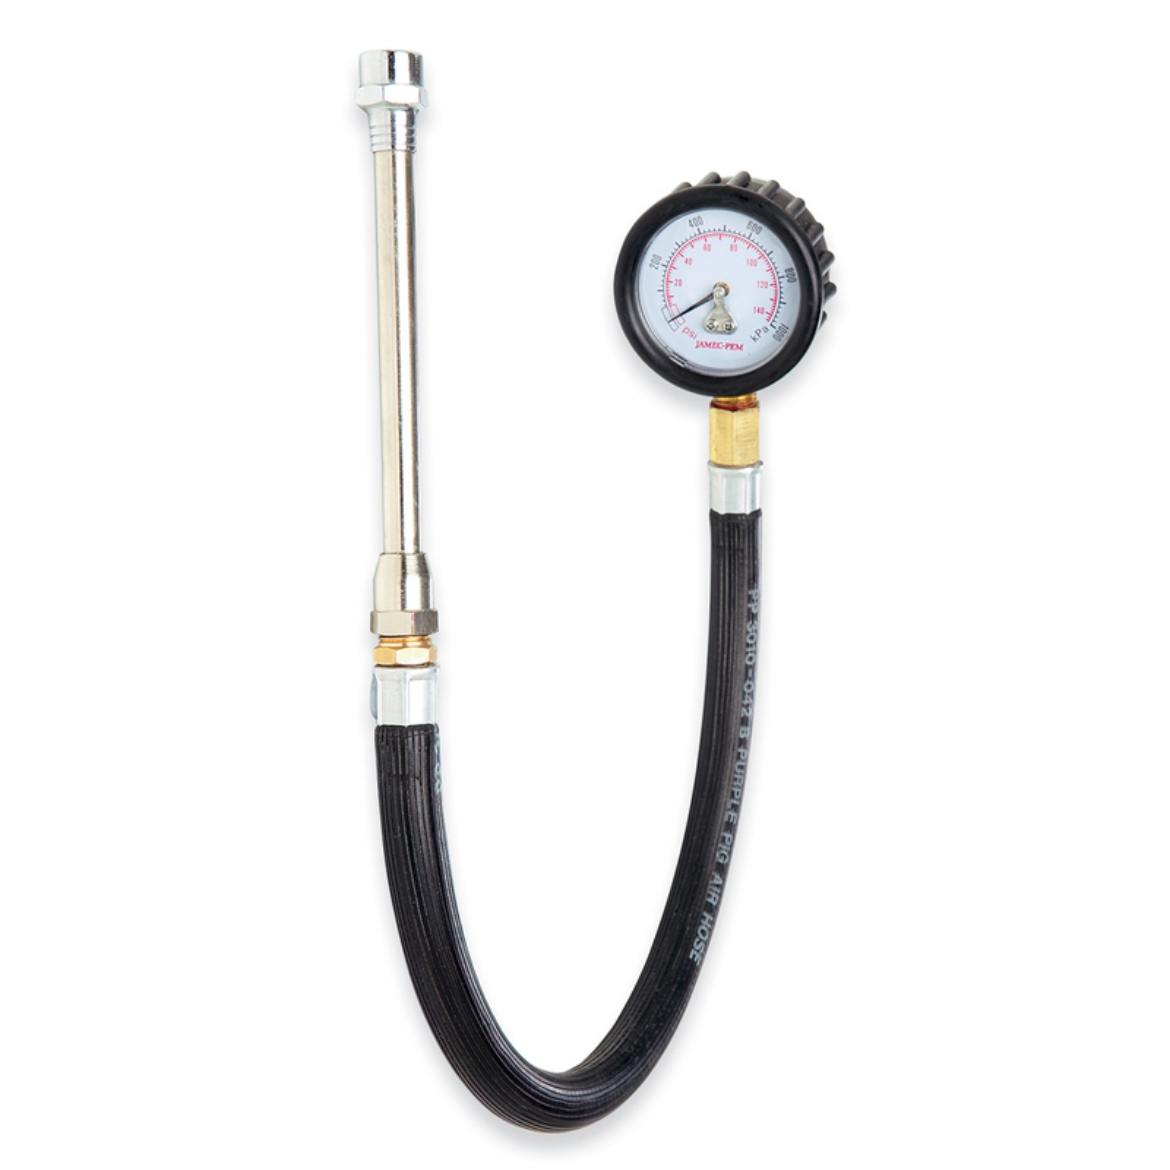 Picture of EARTH MOVER TYRE GAUGE (50mm Dial Gauge - Large Bore Chuck - 10-170 psi or 1-12 kpa)